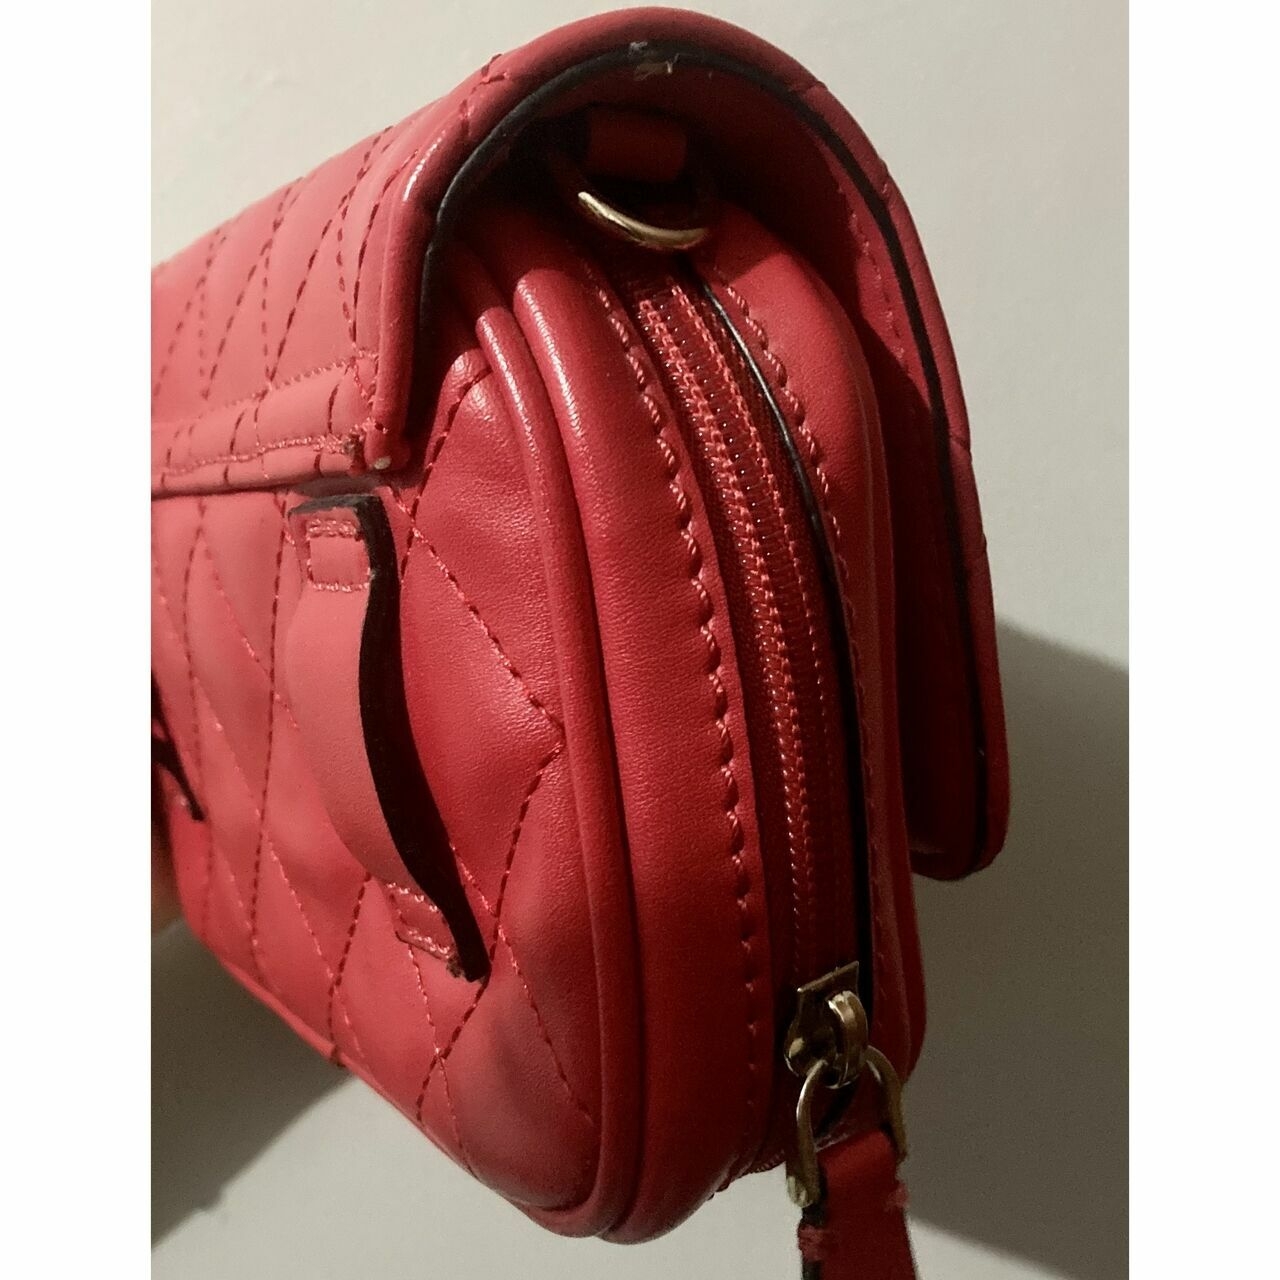 Guess Red Sling Bag